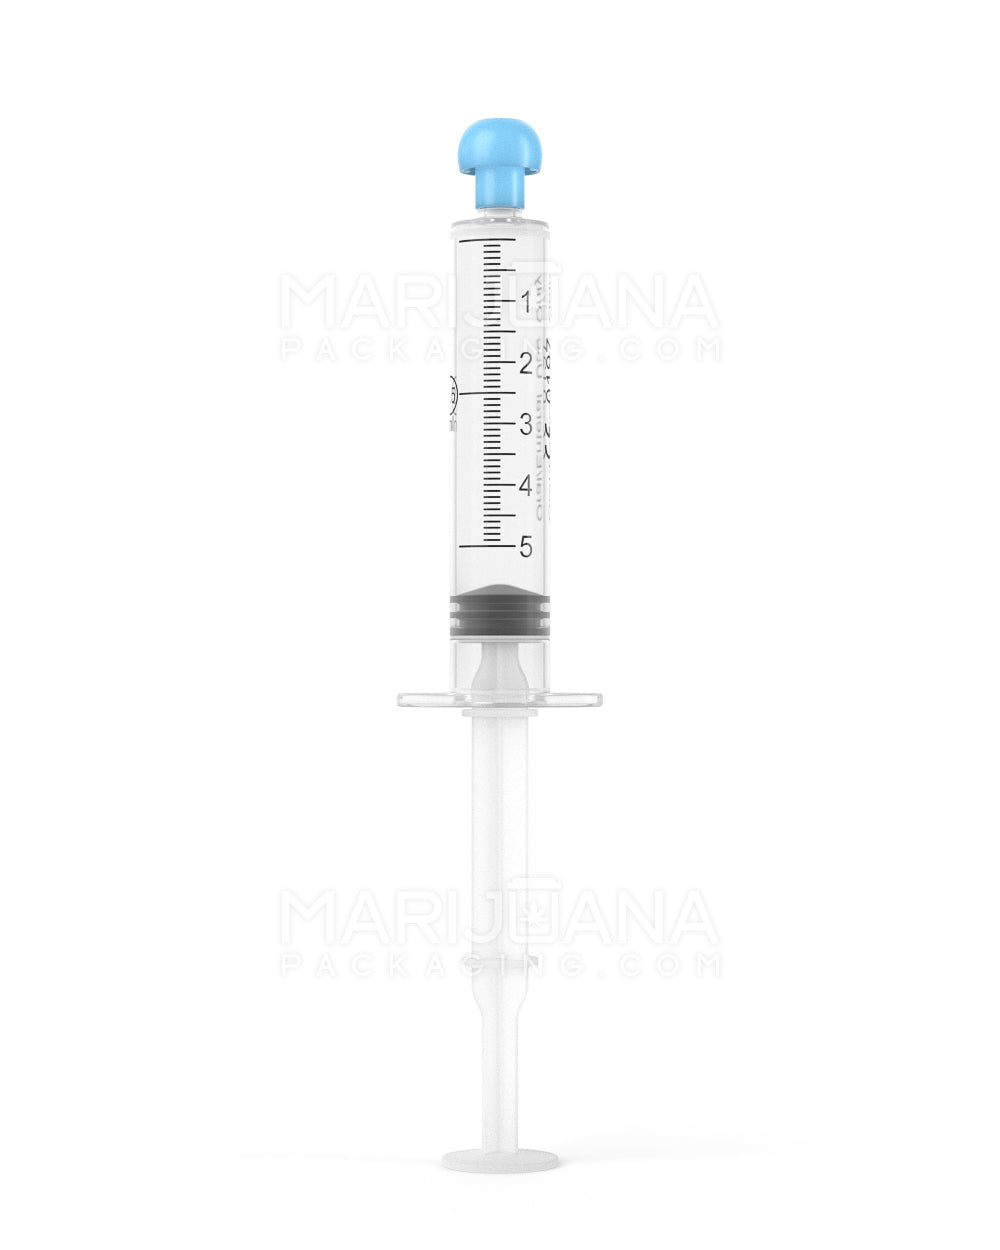 Plastic Oral Concentrate Syringes | 5mL - 1mL Increments - 100 Count - 1